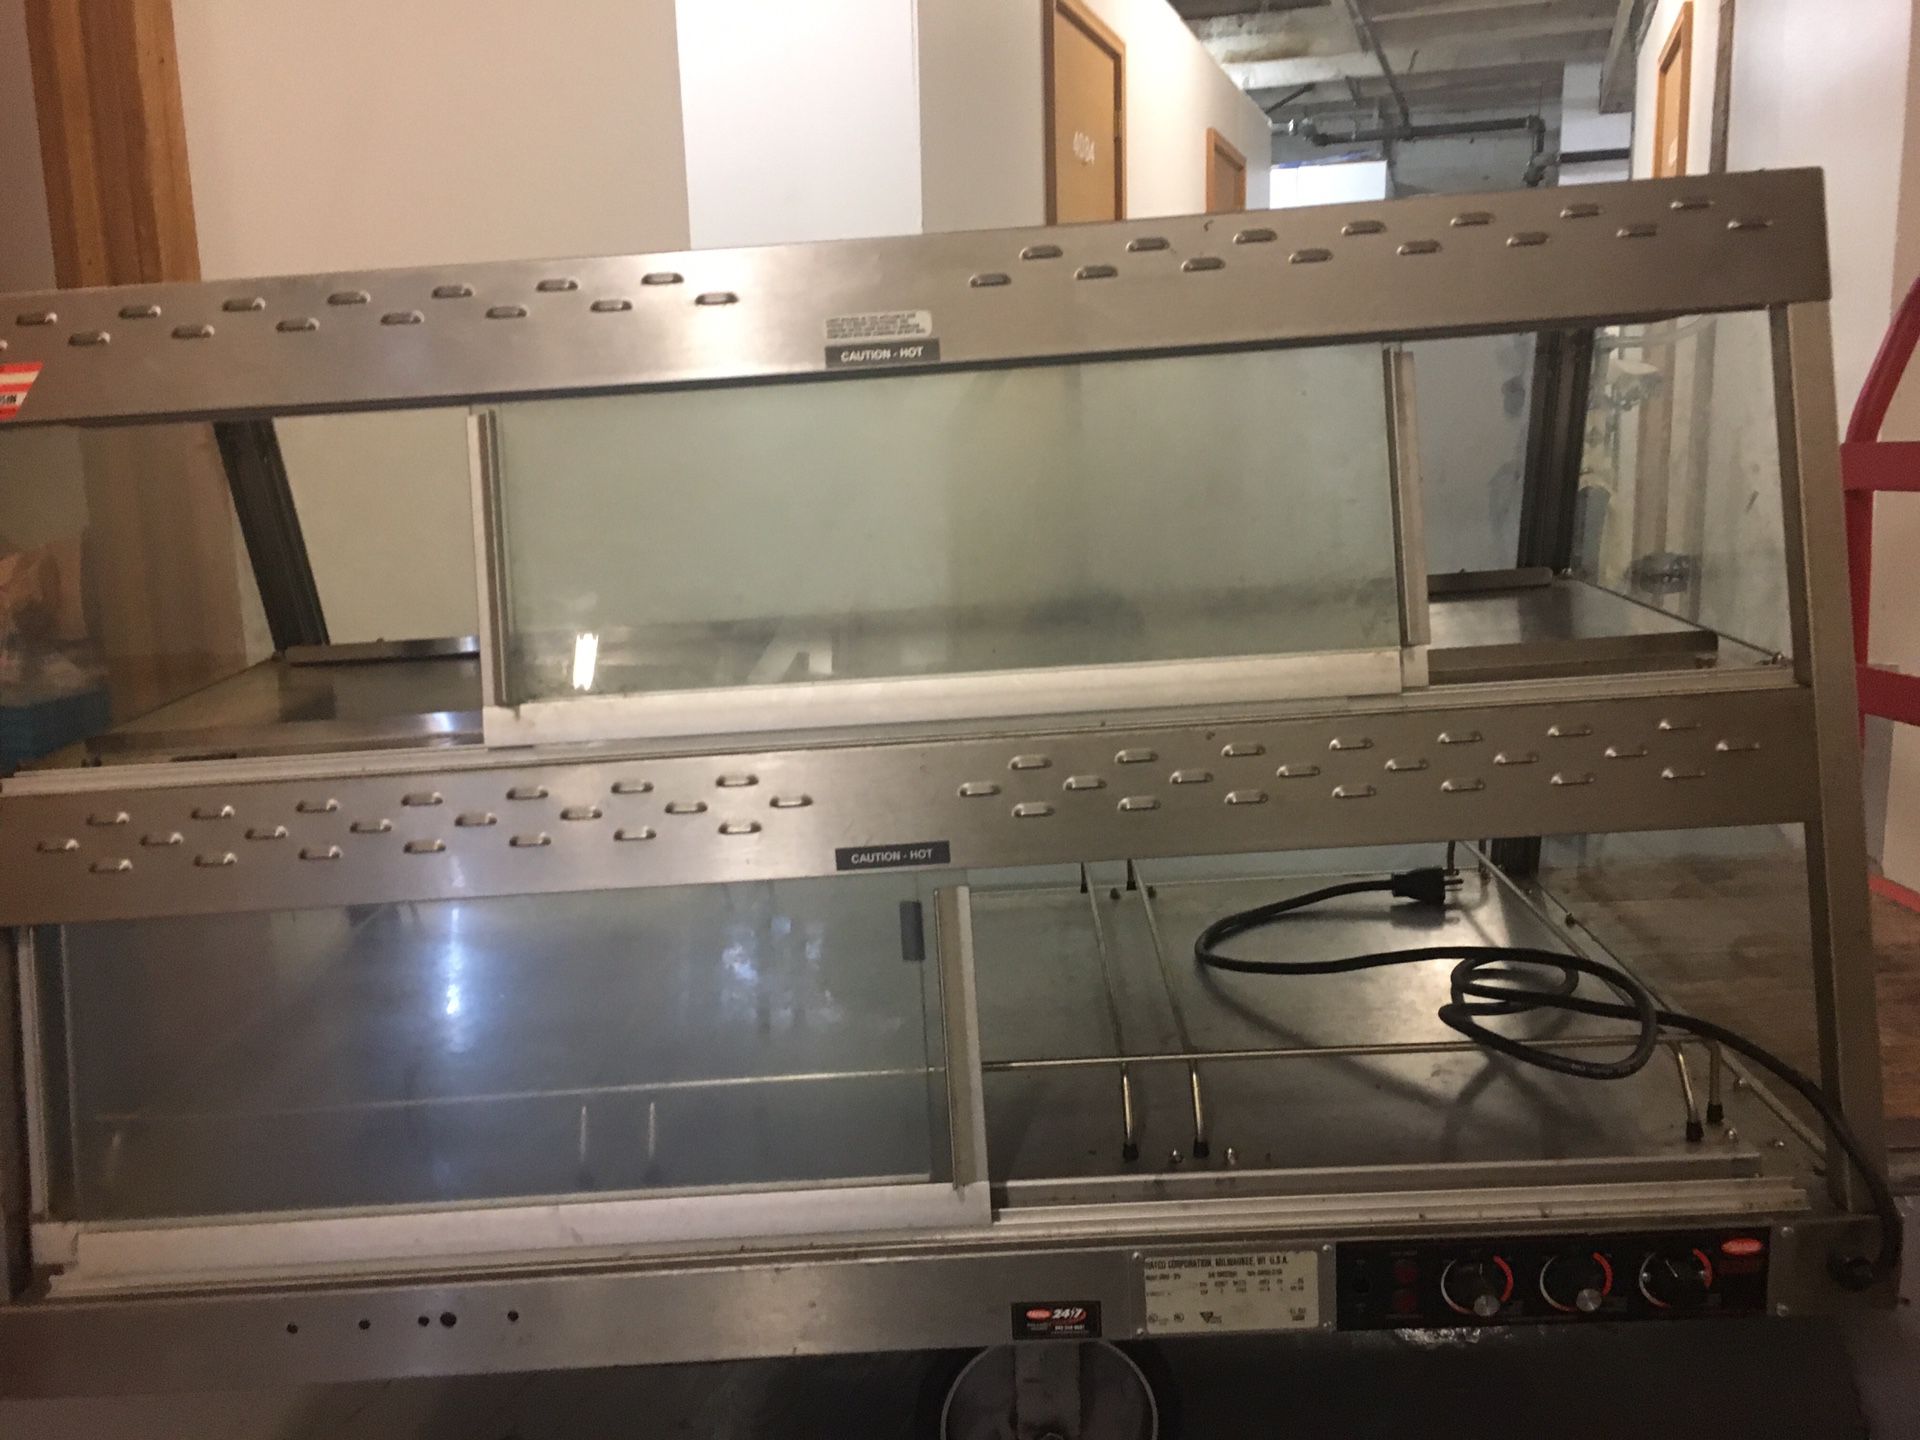 46 inches length 28 inch height food warmer. 500 or best offer. Priced to sell quickly